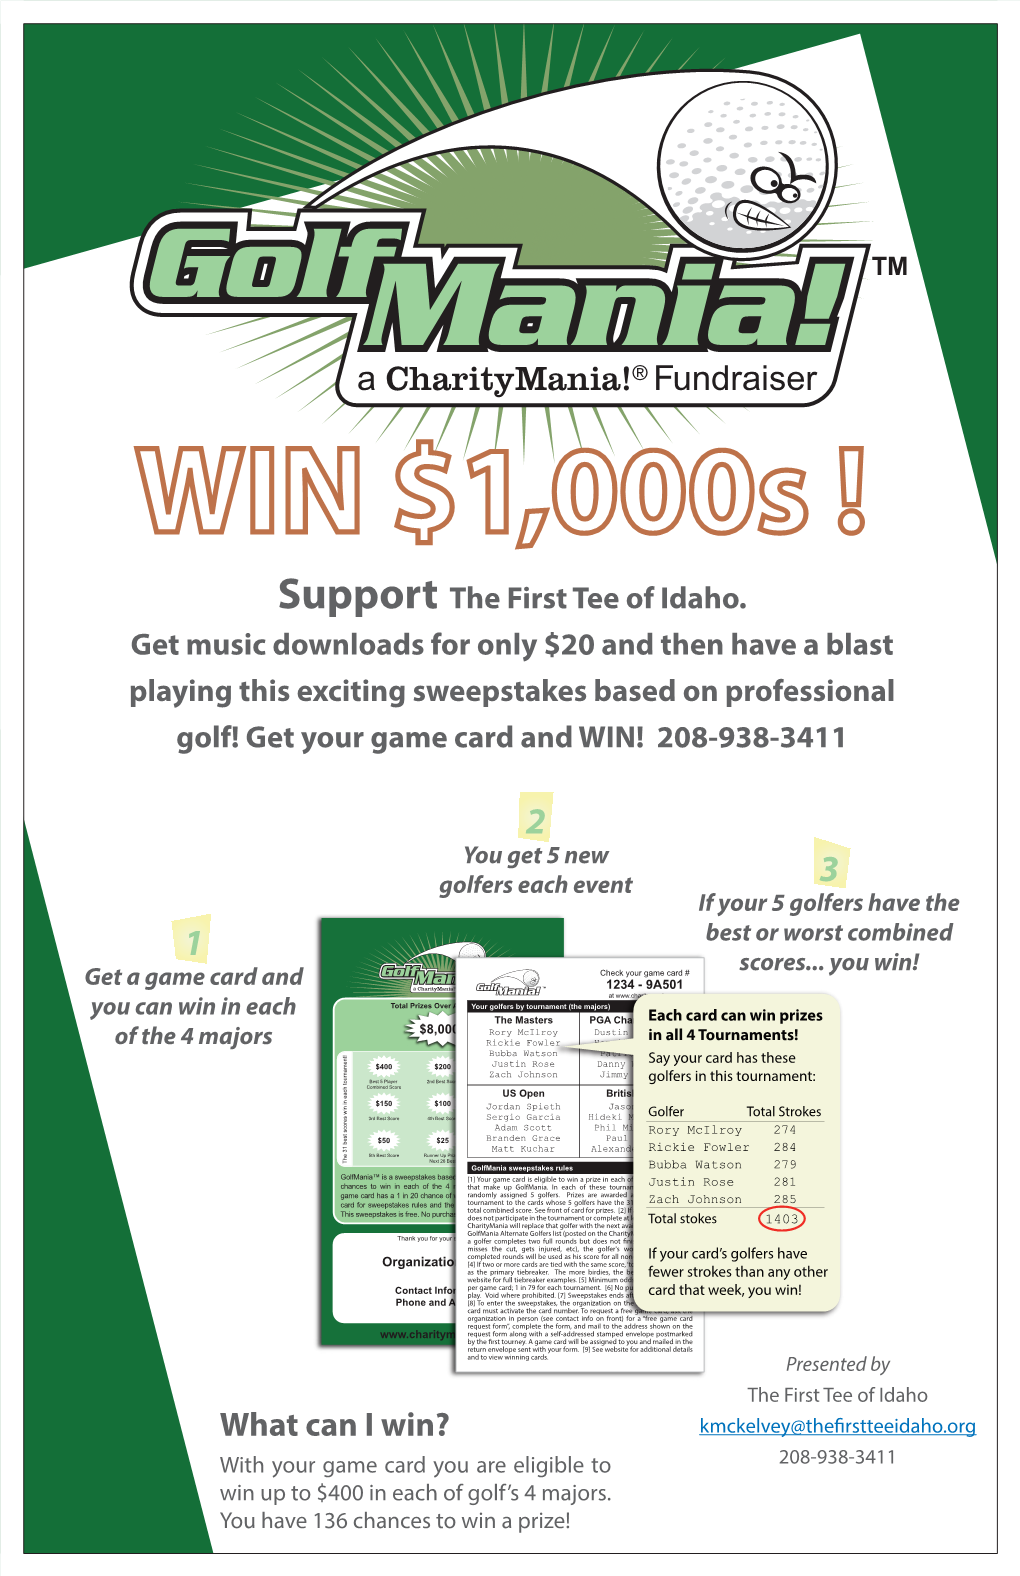 What Can I Win? Kmckelvey@The Rstteeidaho.Org with Your Game Card You Are Eligible to 208-938-3411 Win up to $400 in Each of Golf’S 4 Majors